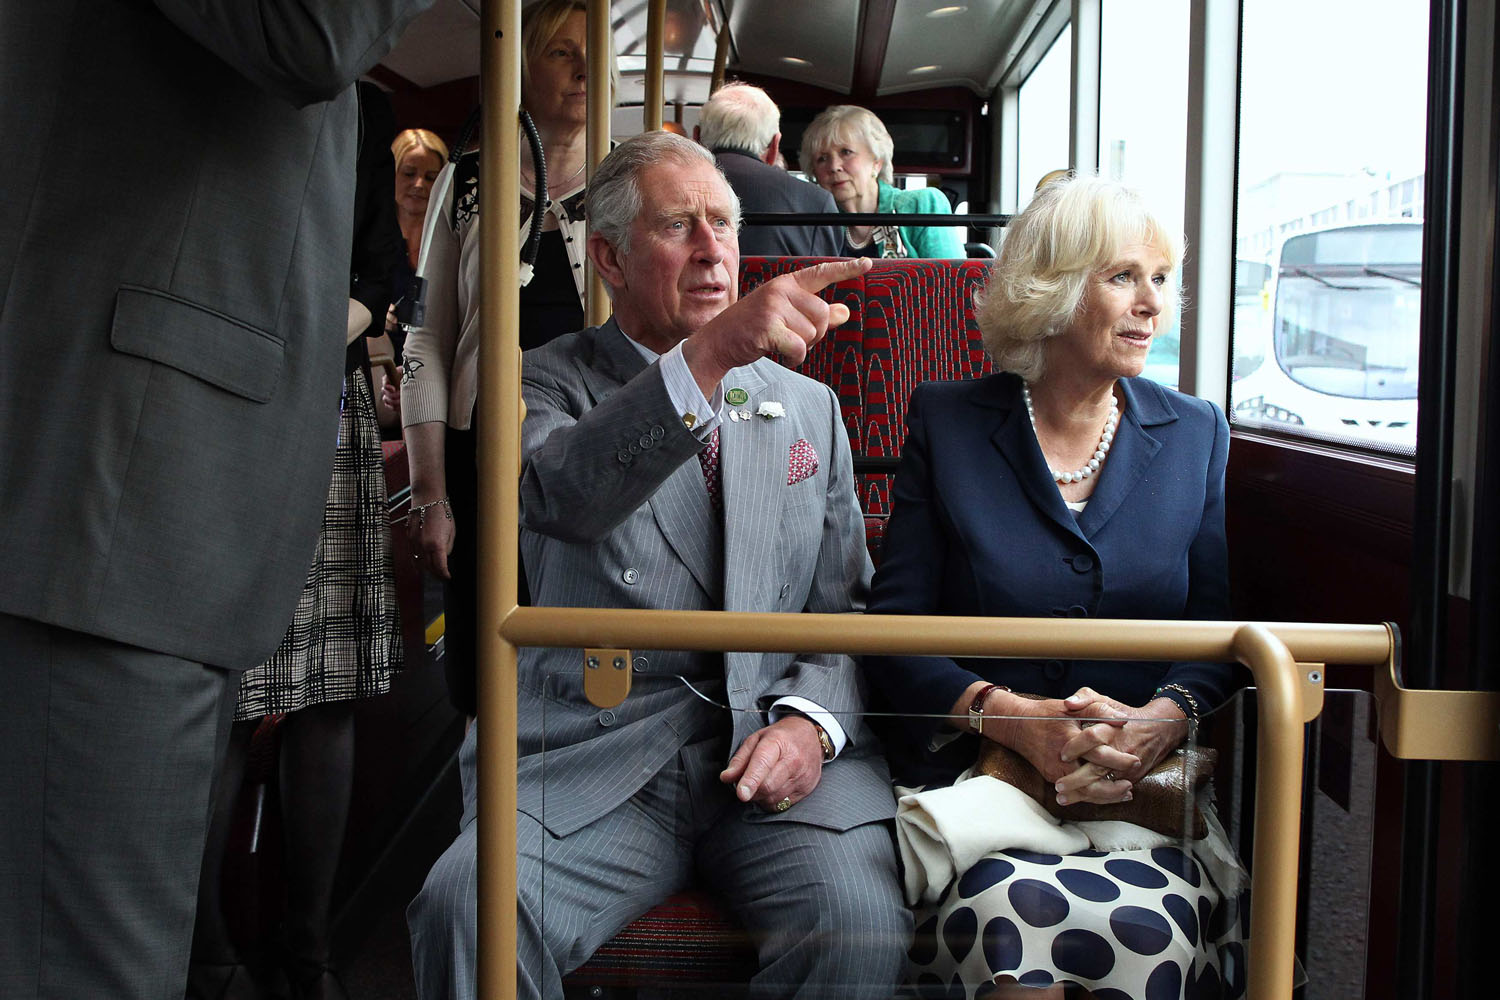 Britain's Prince Charles and his wife Camilla, Duchess of Cornwall take a short ride on a bus during their visit to the Wrightbus factory in Ballymena, Northern Ireland